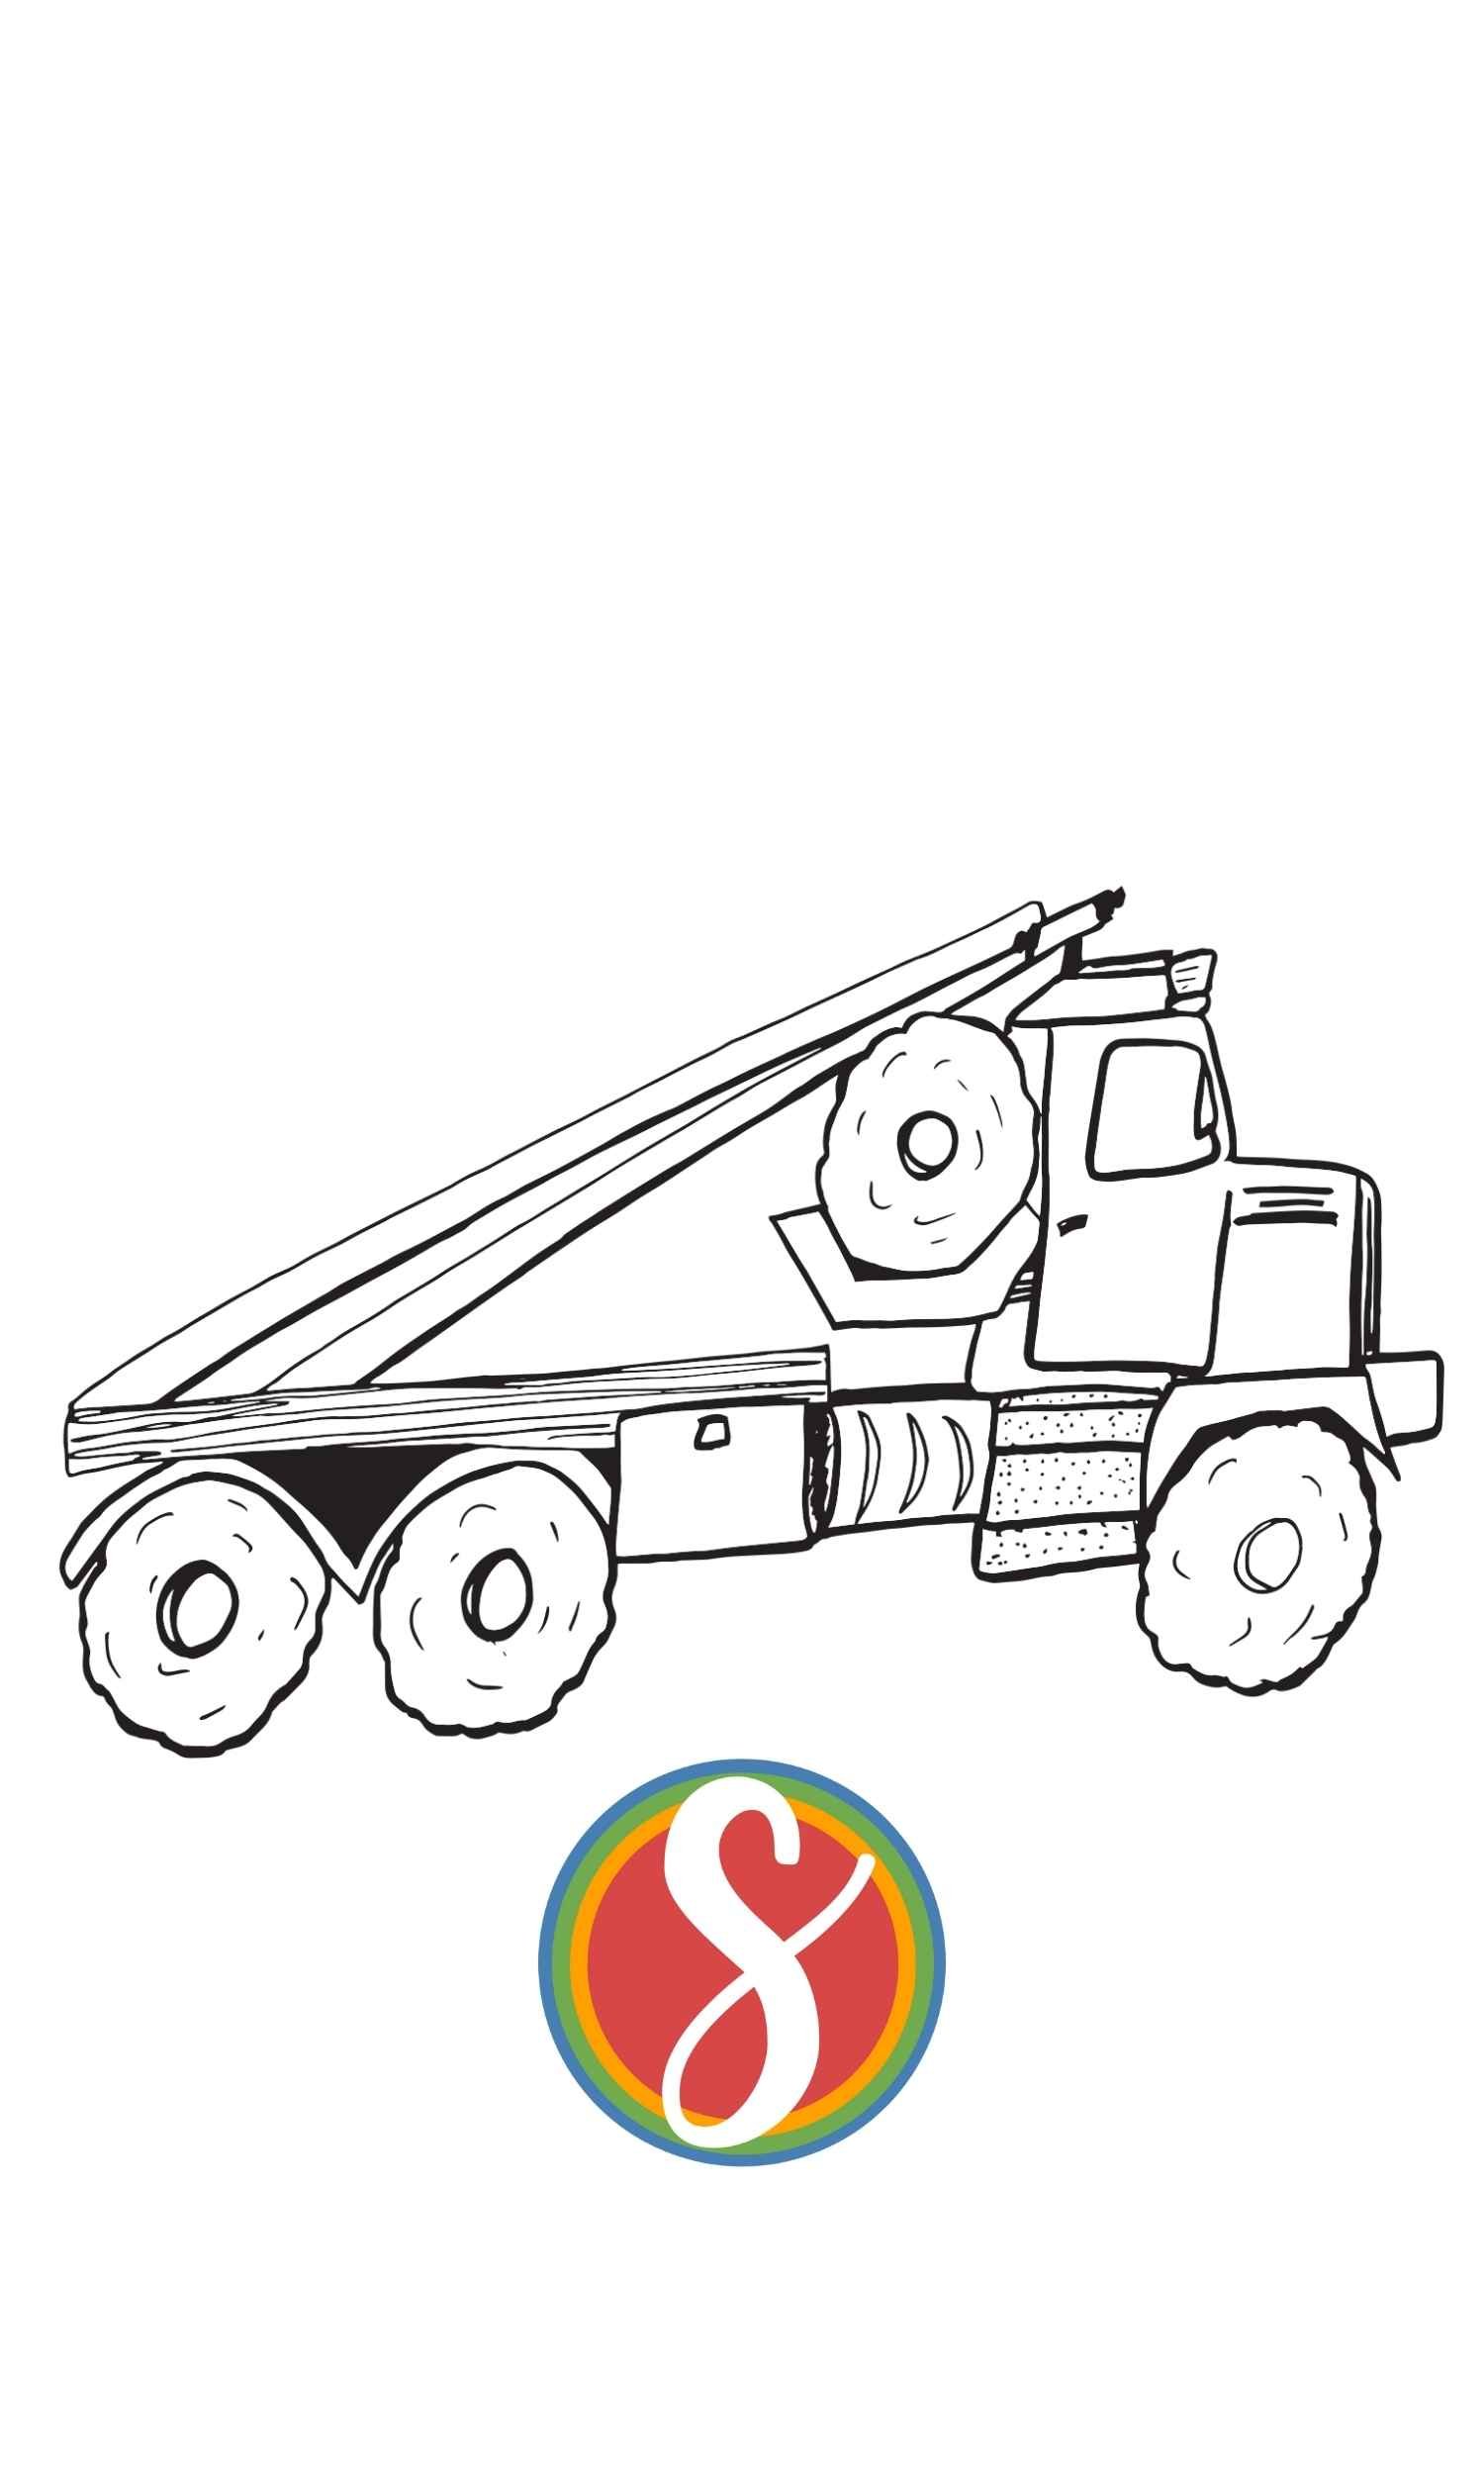 a kids truck coloring page with a simple big rig